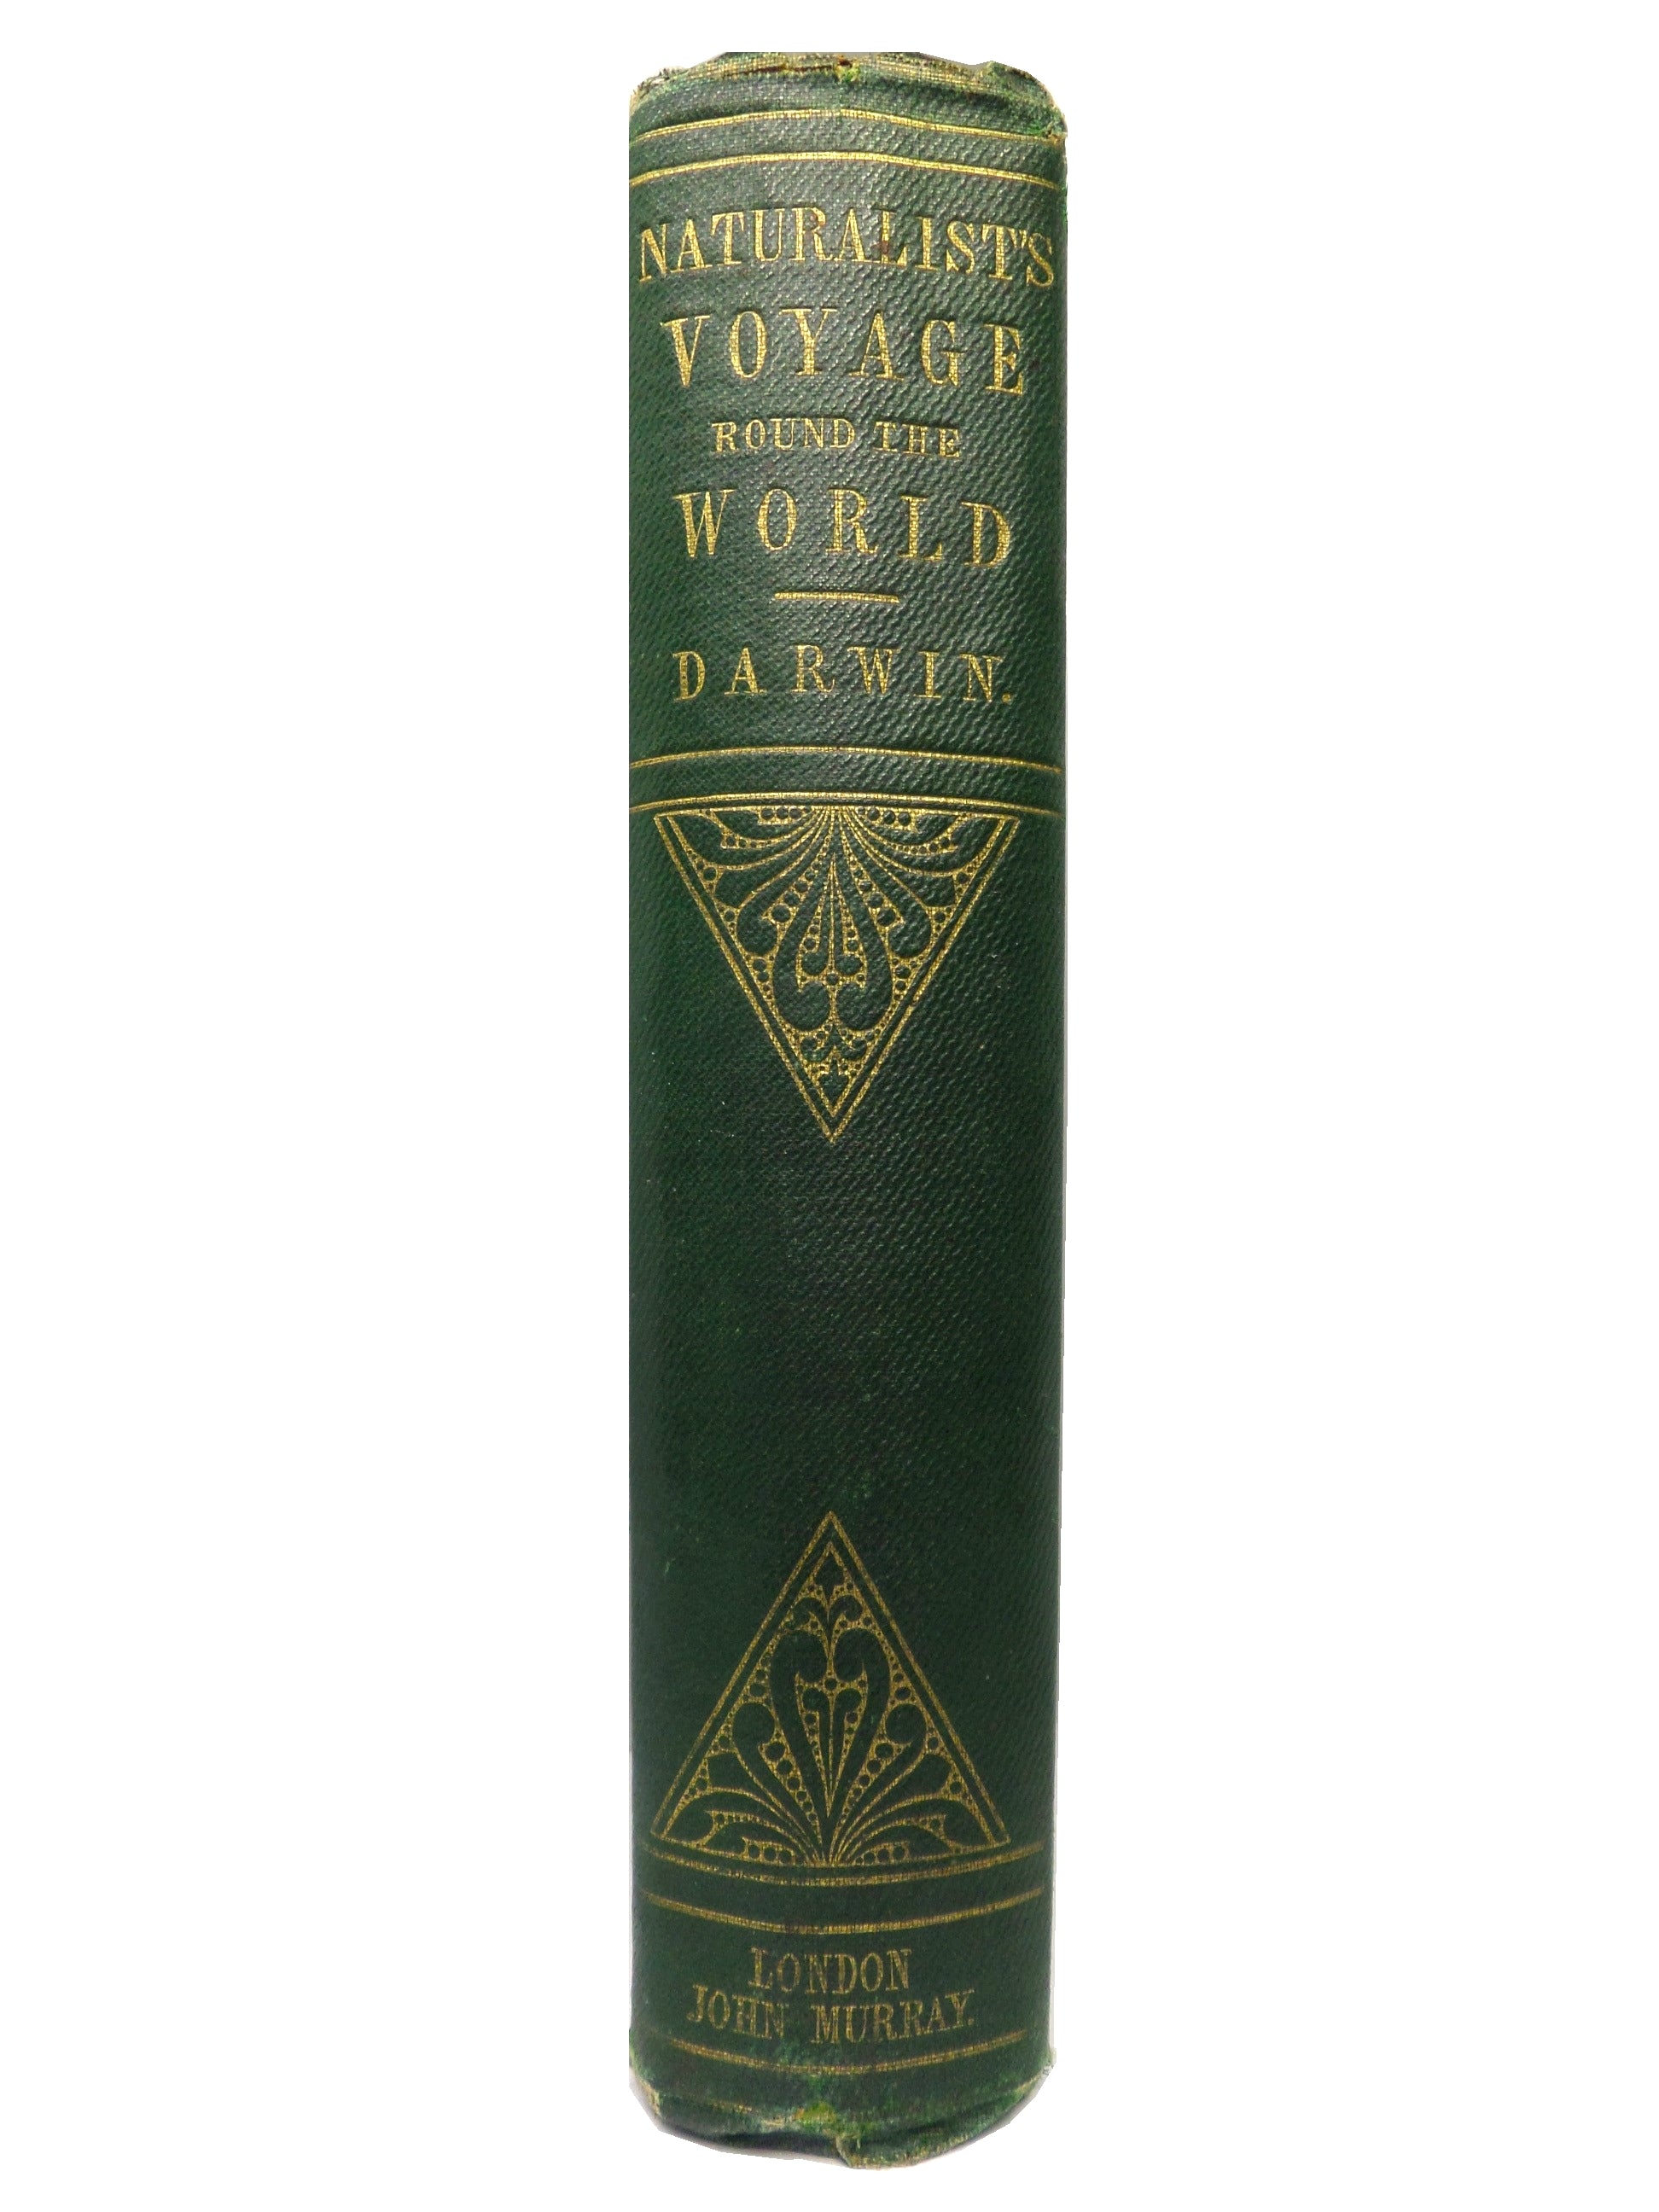 JOURNAL OF RESEARCHES - VOYAGE OF HMS BEAGLE 1860 CHARLES DARWIN SECOND EDITION